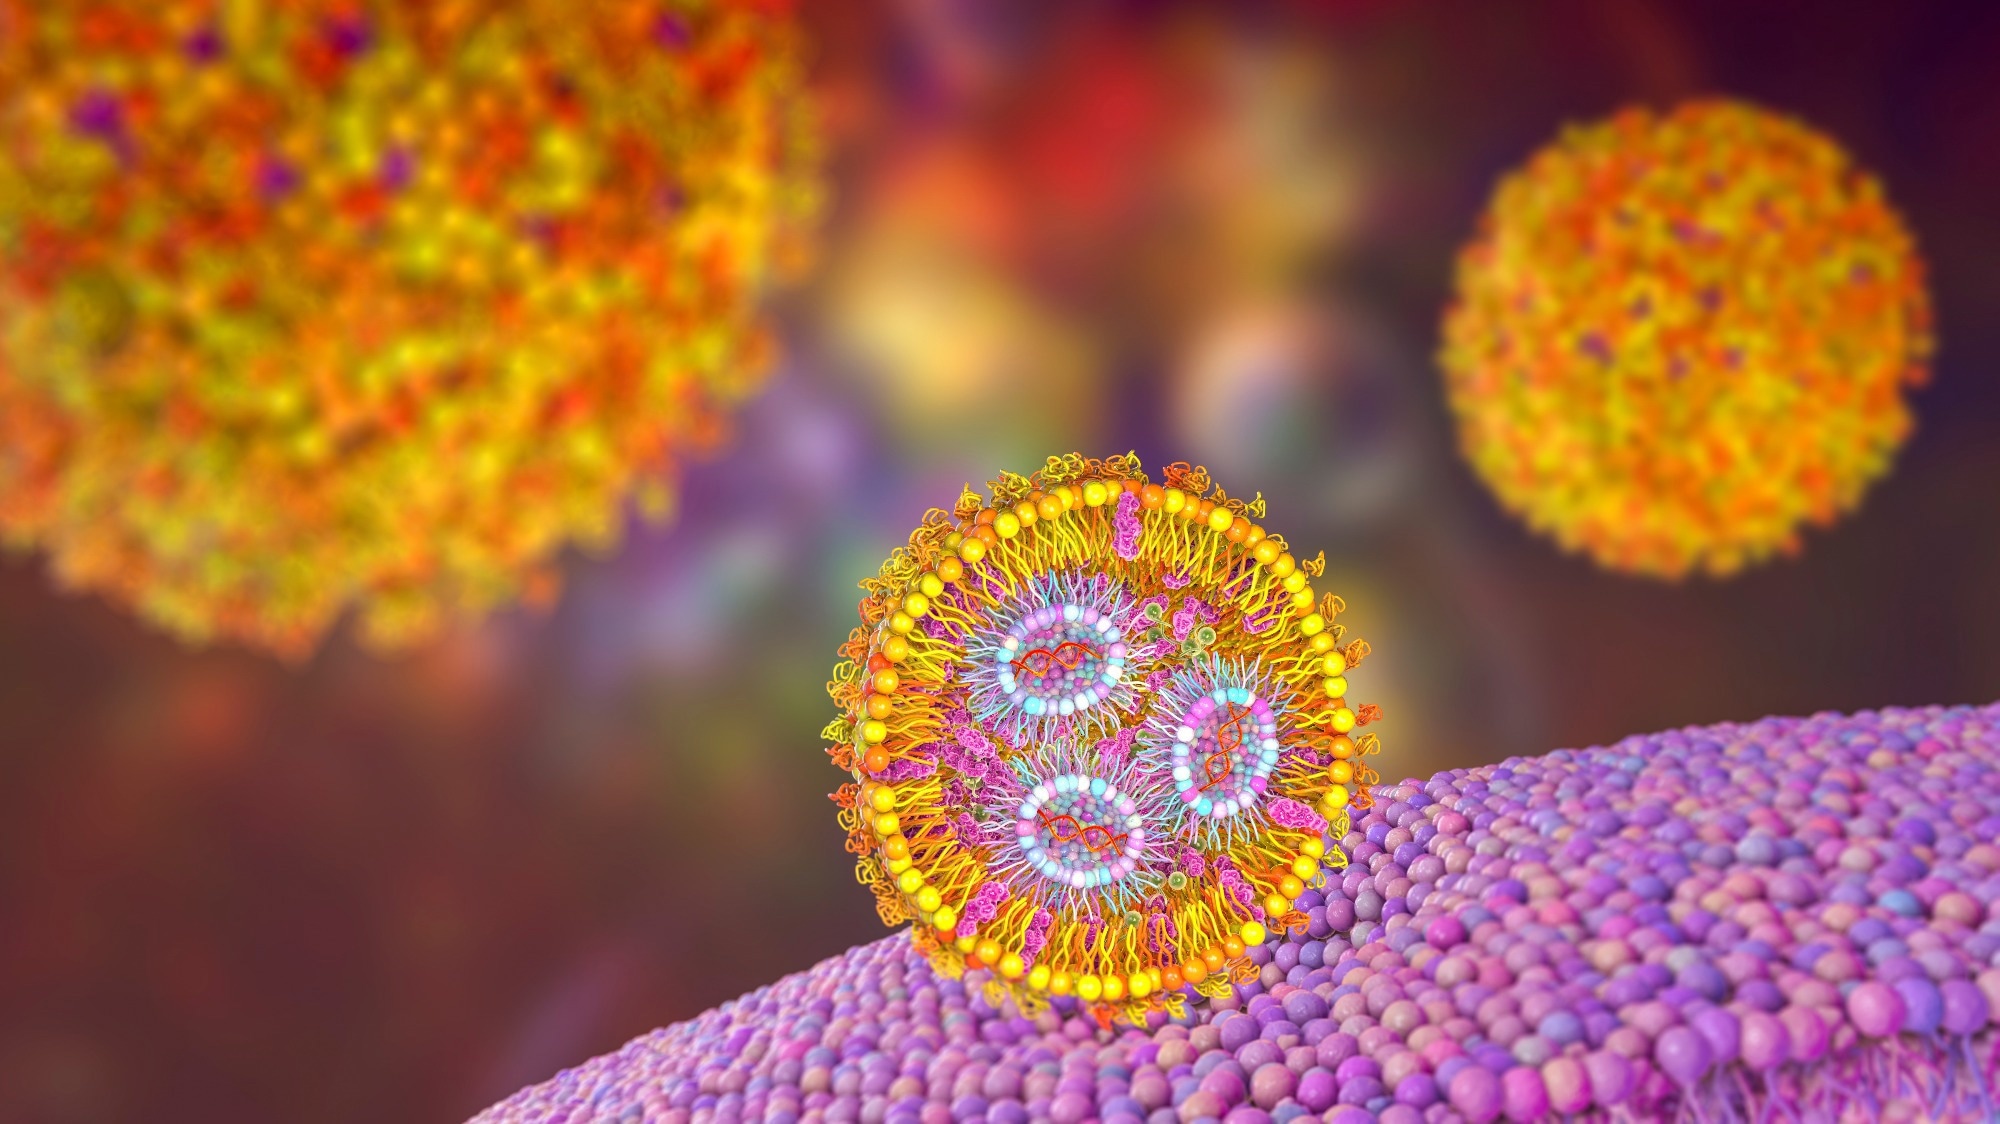 Study: Rational Development of Hypervalent Glycan Shield-Binding Nanoparticles with Broad-Spectrum Inhibition against Fatal Viruses Including SARS-CoV-2 Variants. Image Credit: Kateryna Kon / Shutterstock